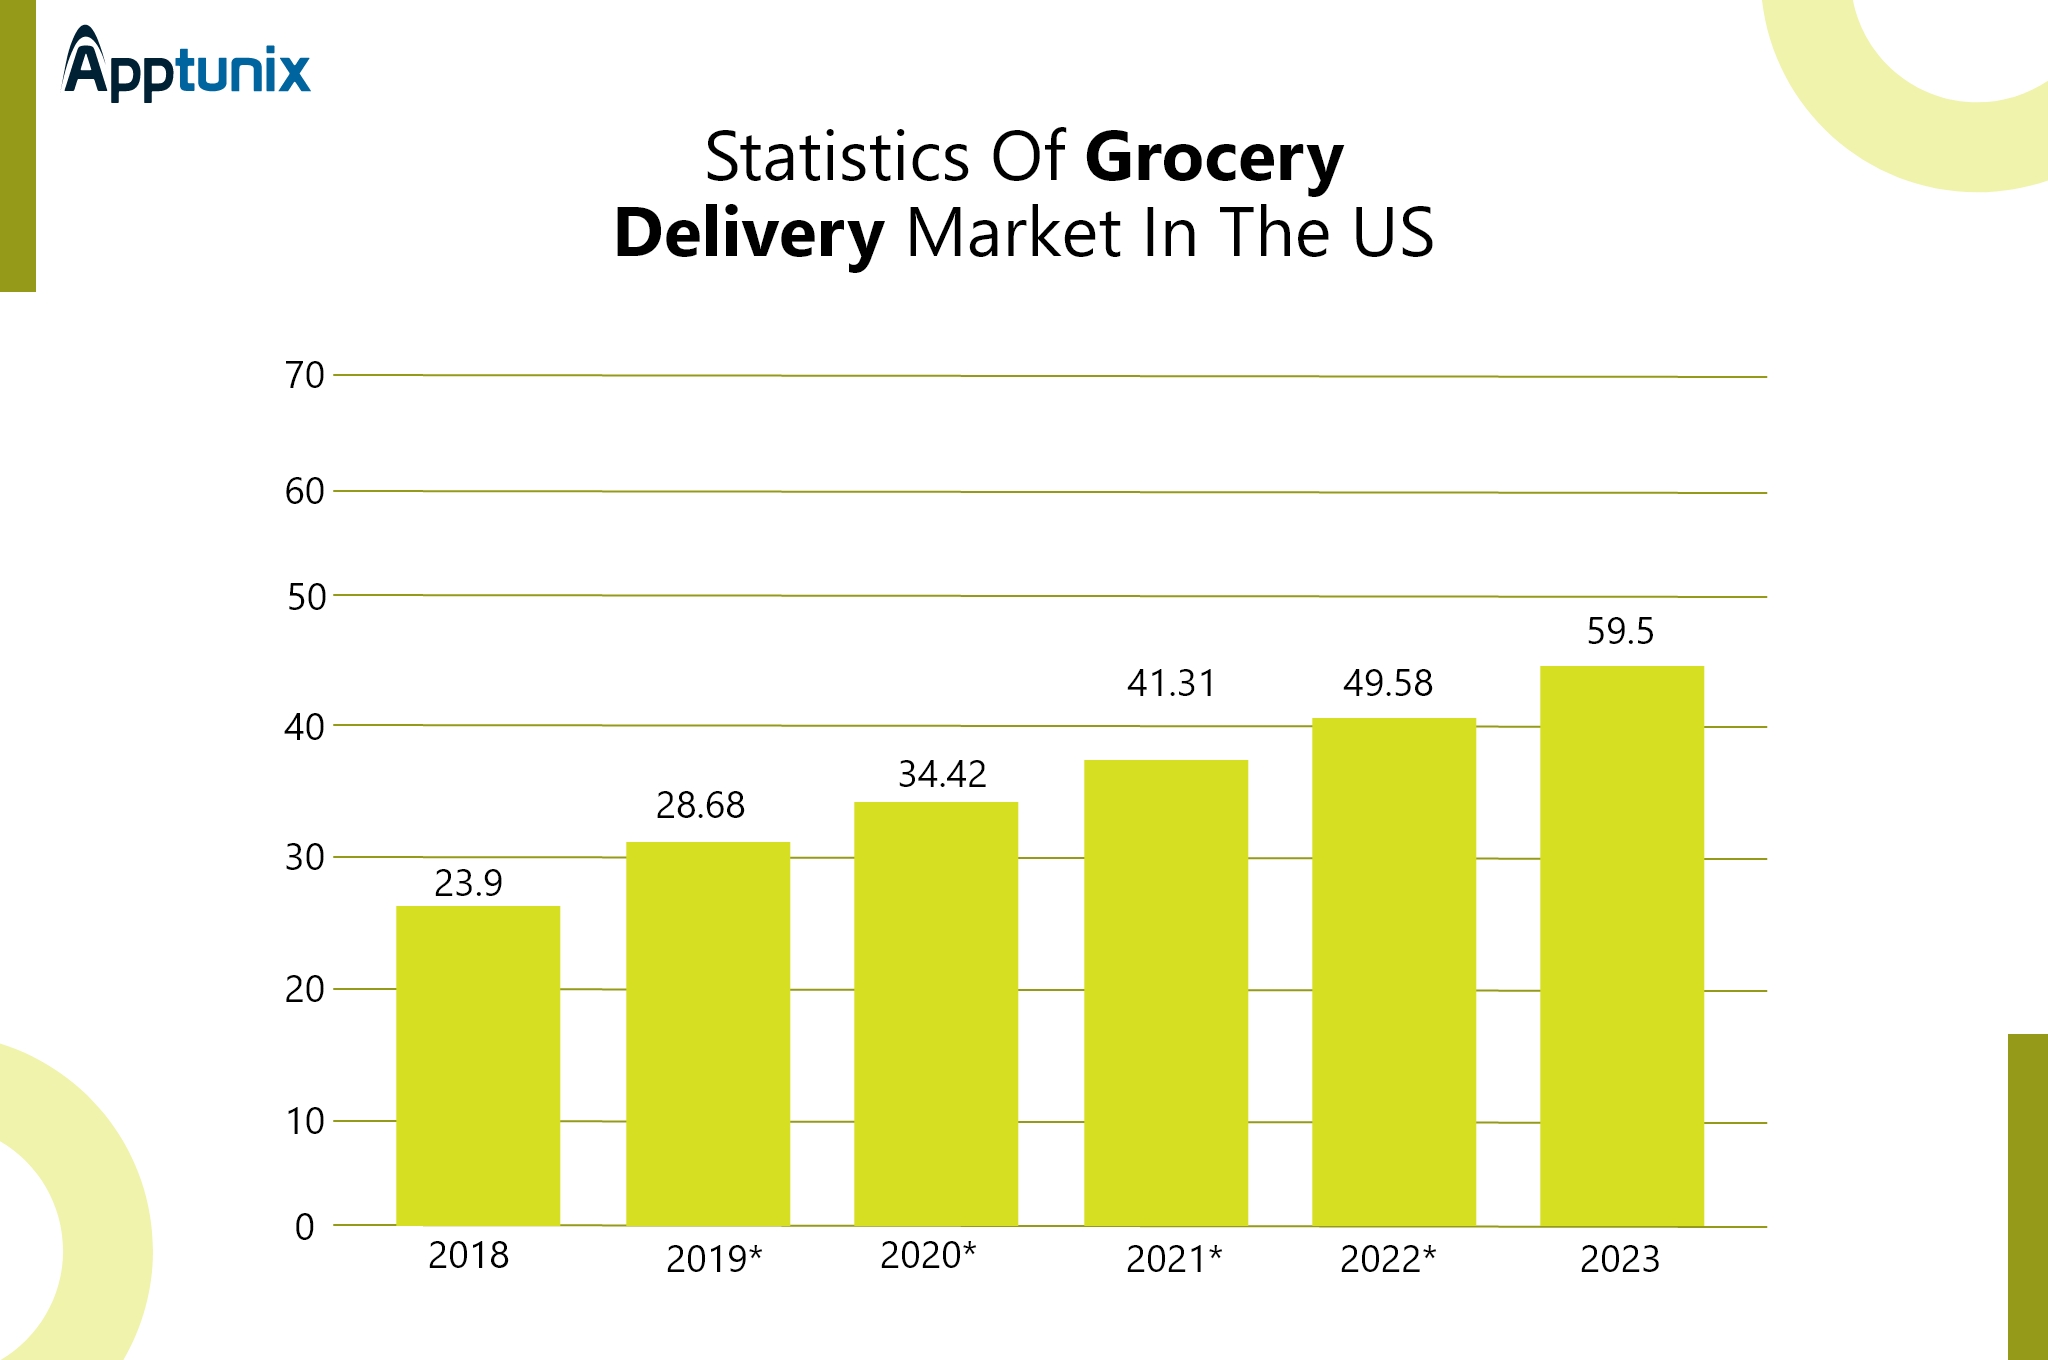 Ola grocery delivery statistics for US